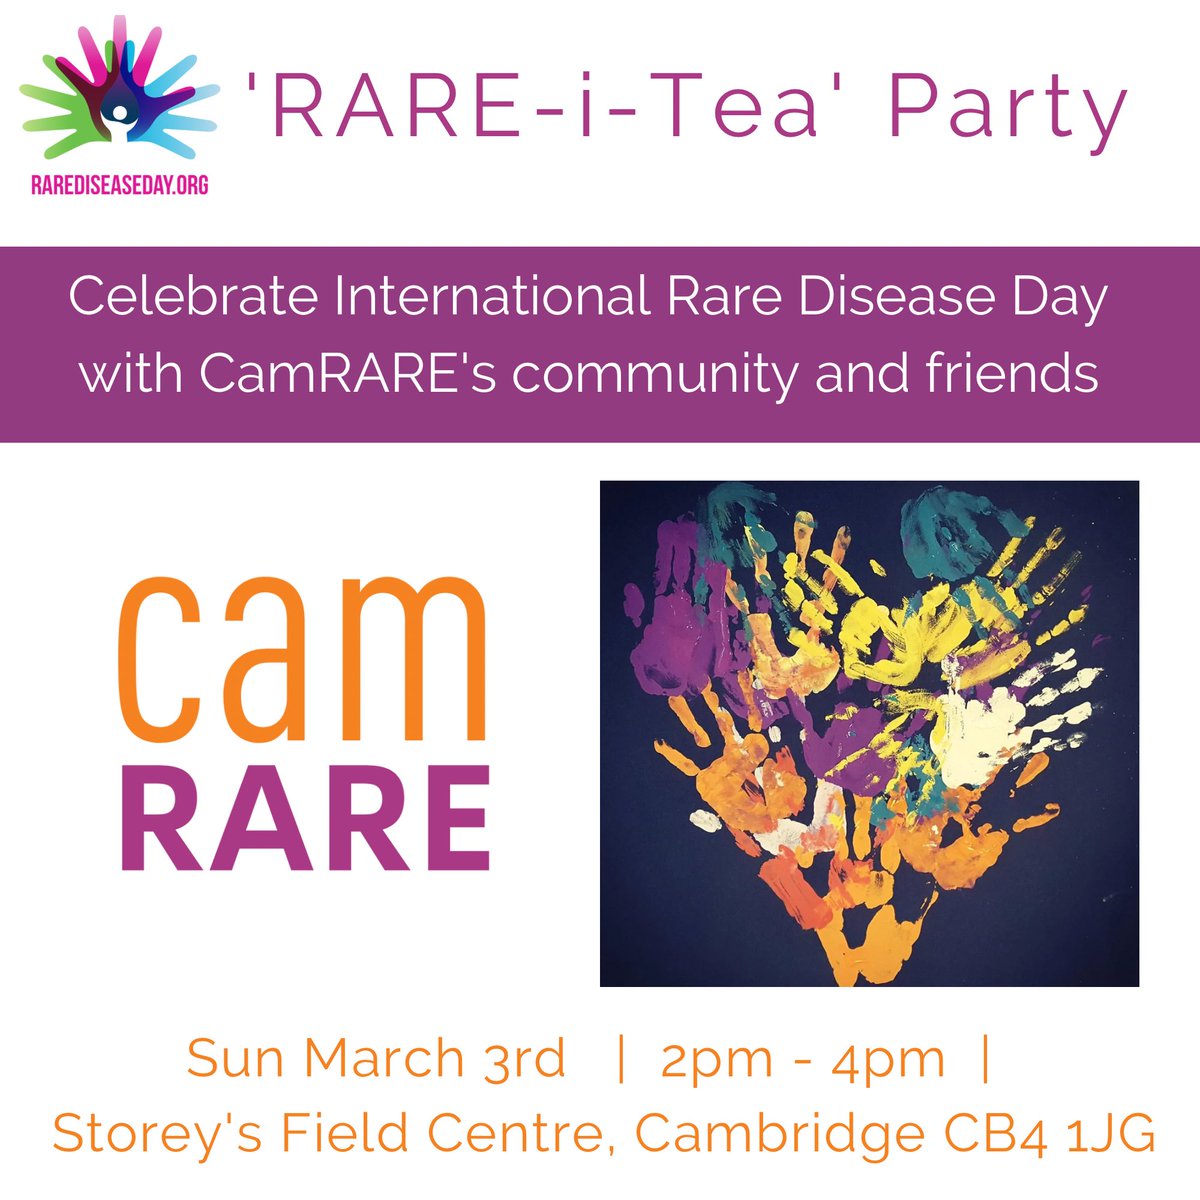 We’re holding our Rare-i-Tea Party on Sunday 3 March! Join CamRARE, #Cards4Bravery & Shake Rattle and Roll for refreshments, mingling, sensory fun, music and movement to celebrate #RareDiseaseDay Everyone welcome, tickets free via bit.ly/Rare-i-TeaPart… @rarediseaseday